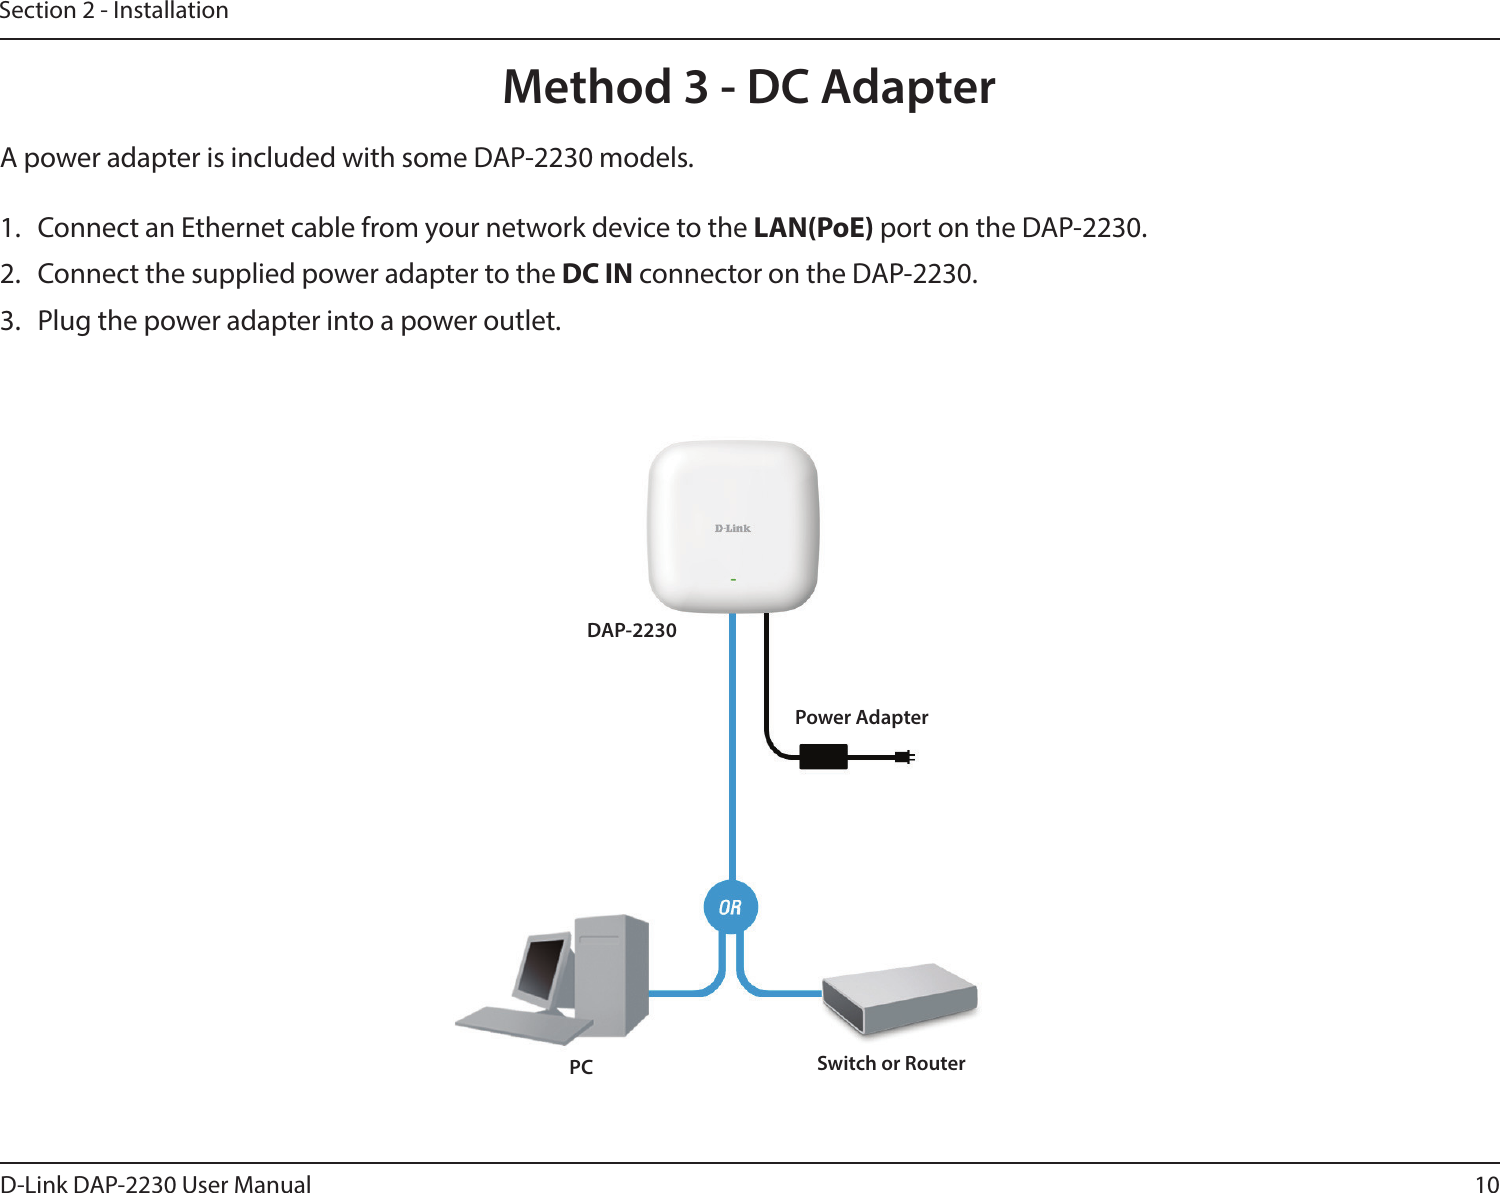 10D-Link DAP-2230 User ManualSection 2 - InstallationA power adapter is included with some DAP-2230 models.1.  Connect an Ethernet cable from your network device to the LAN(PoE) port on the DAP-2230.2.  Connect the supplied power adapter to the DC IN connector on the DAP-2230.3.  Plug the power adapter into a power outlet.Method 3 - DC AdapterDAP-2230Switch or RouterPCPower Adapter